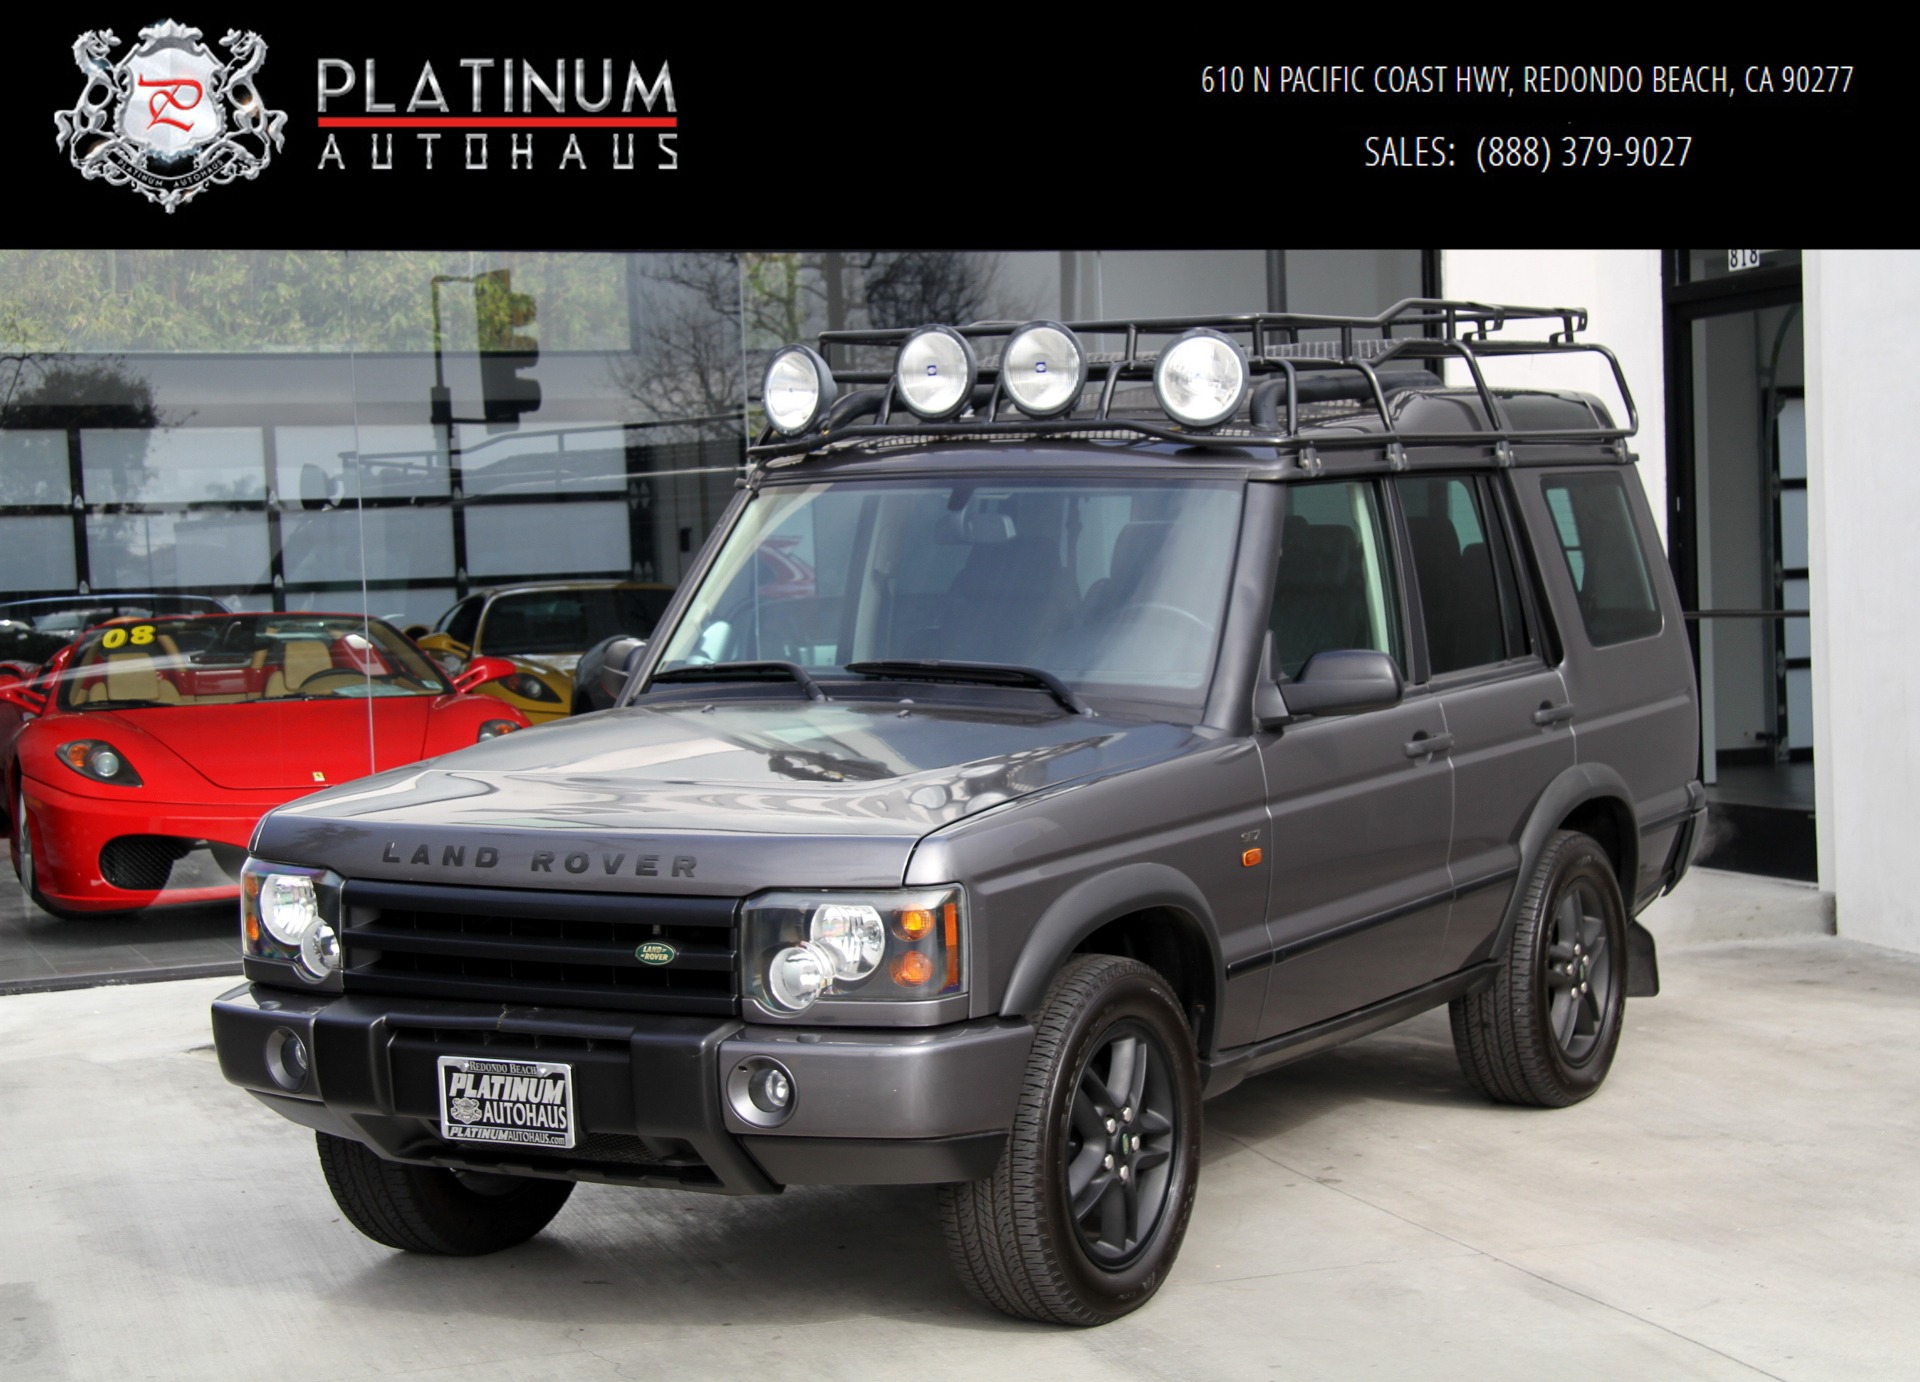 Отзывы ленд ровер дискавери 2.7. Land Rover Discovery 2. Ленд Ровер Дискавери 2004. Land Rover Discovery II 2. Land Rover Discovery 2004.